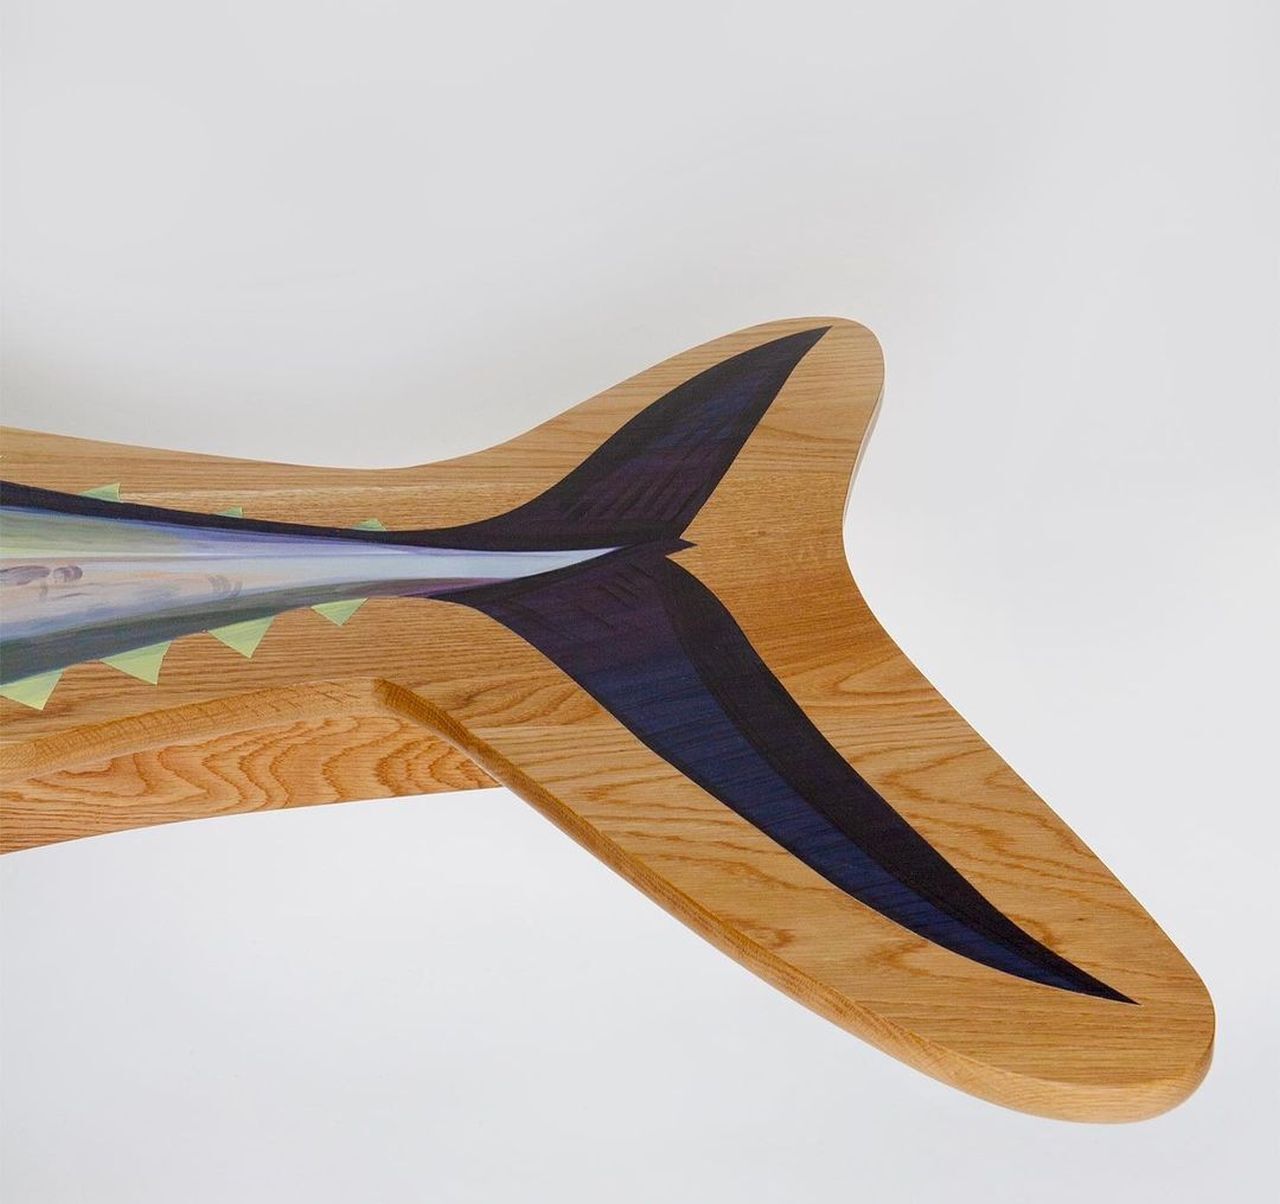 Tuna Fish Table by Japanese Designer-tail detailing